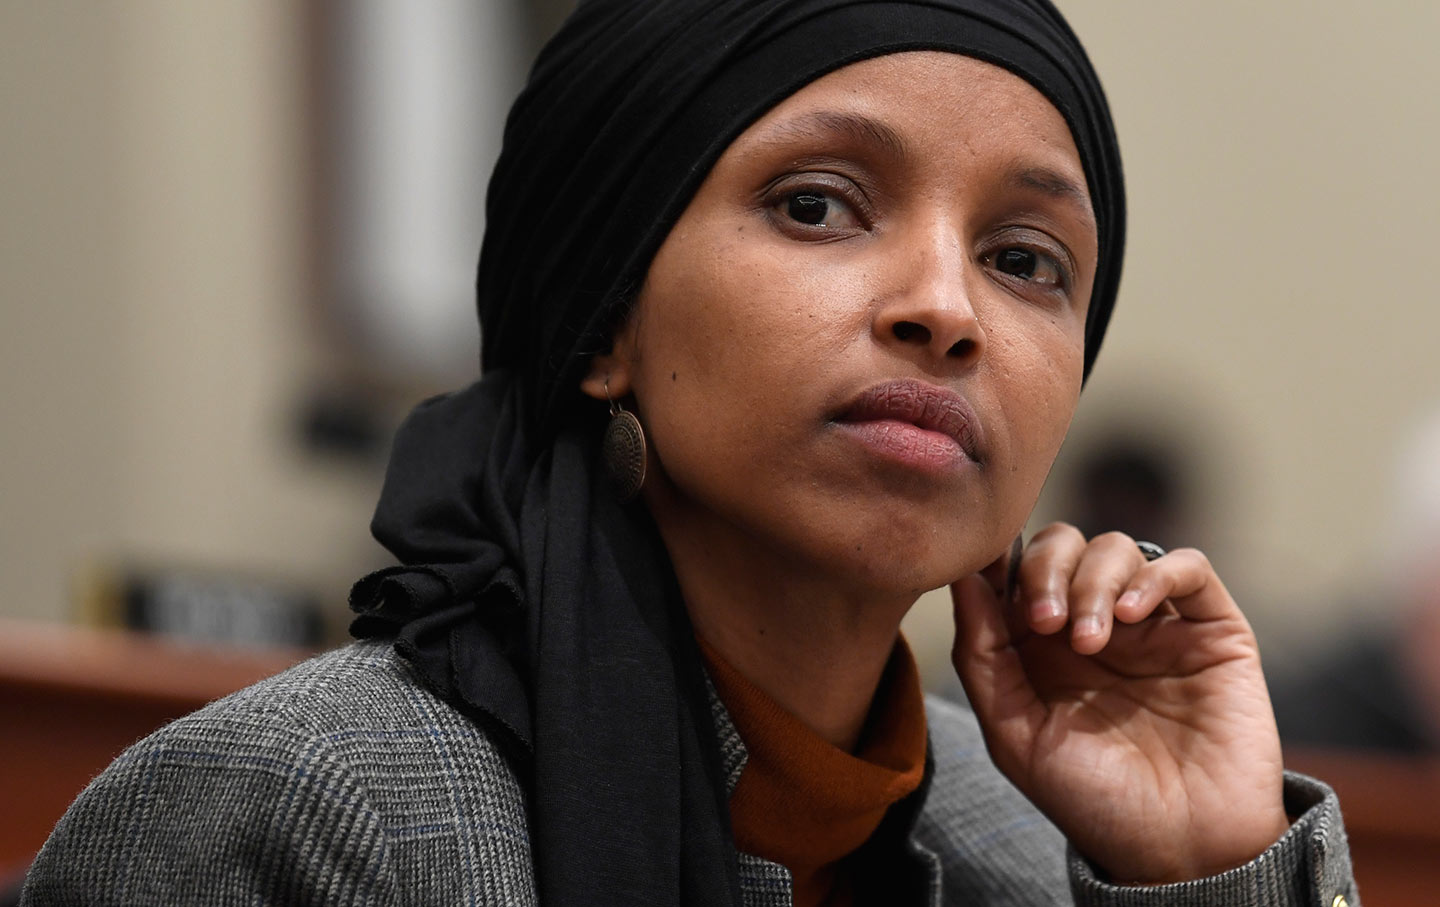 In this March 12, 2019, photo, Rep. Ilhan Omar, D-Minn., listens as Office of Management and Budget Acting Director Russ Vought testifies before the House Budget Committee on Capitol Hill in Washington. Debate in Congress over Israel and anti-Semitism is providing President Donald Trump an opening to appeal to Jewish American voters (AP Photo/Susan Walsh)